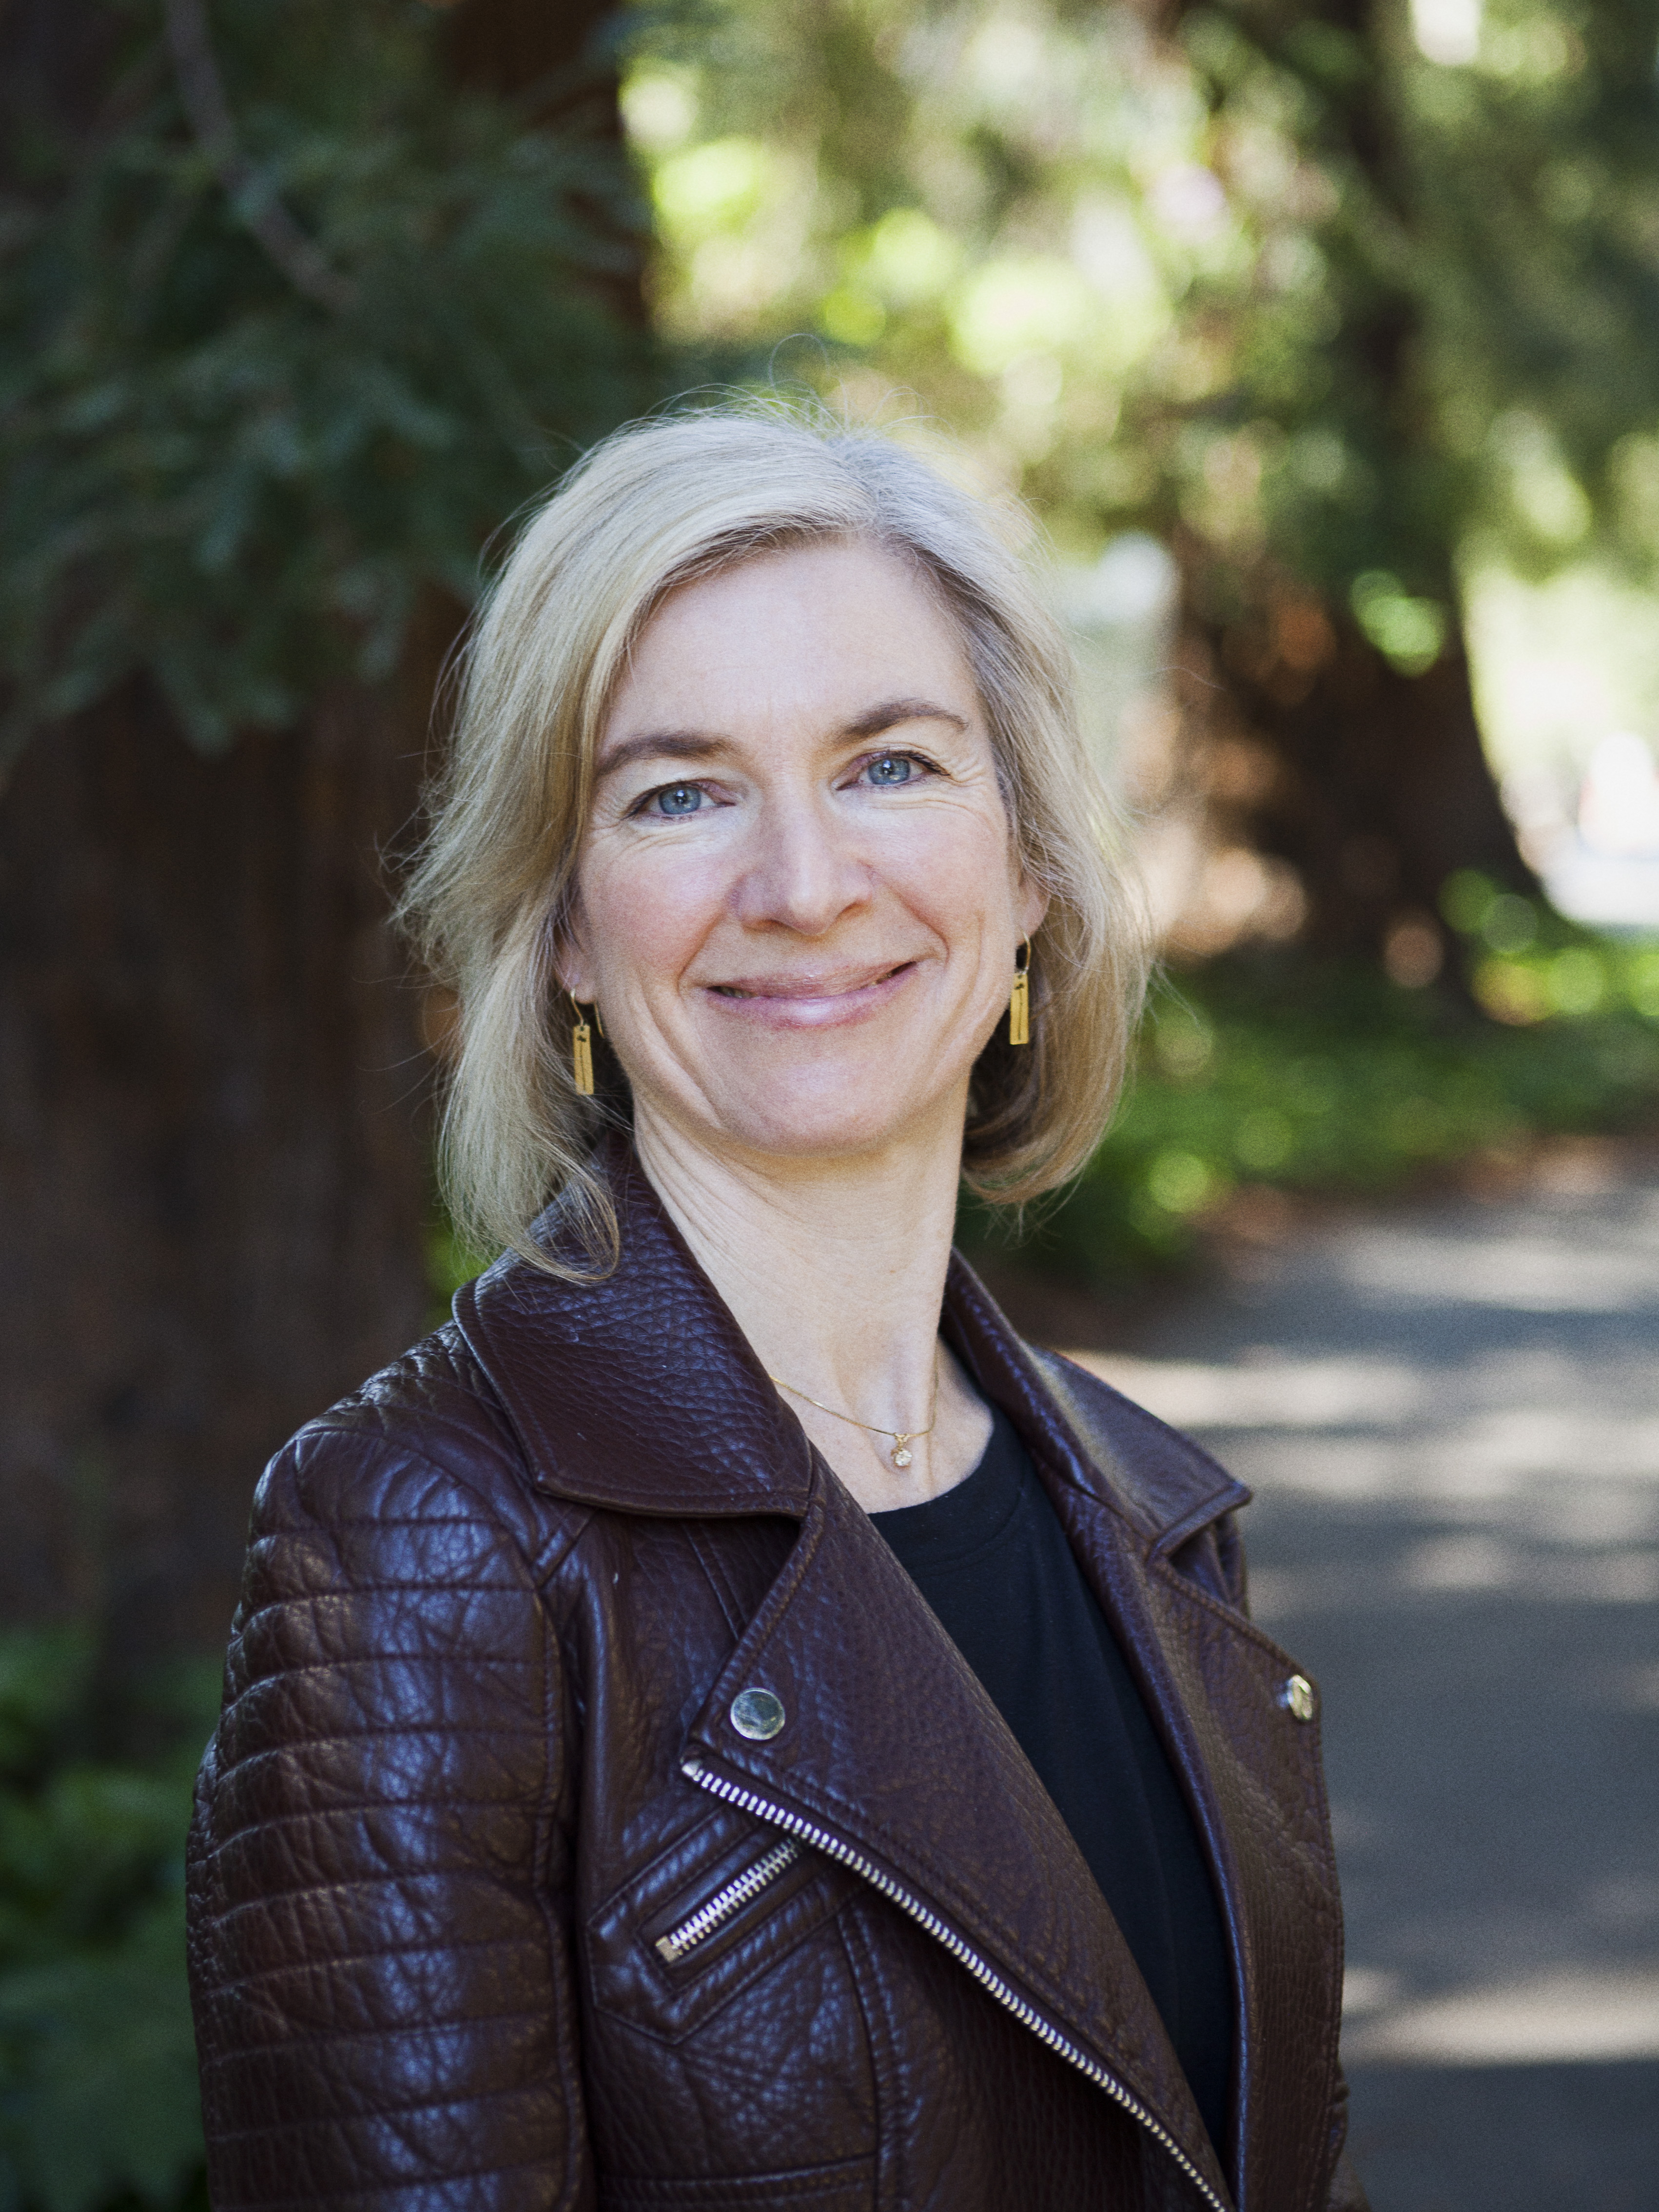 Portrait photo of Jennifer Doudna casually dressed and smiling in front of shaded trees.